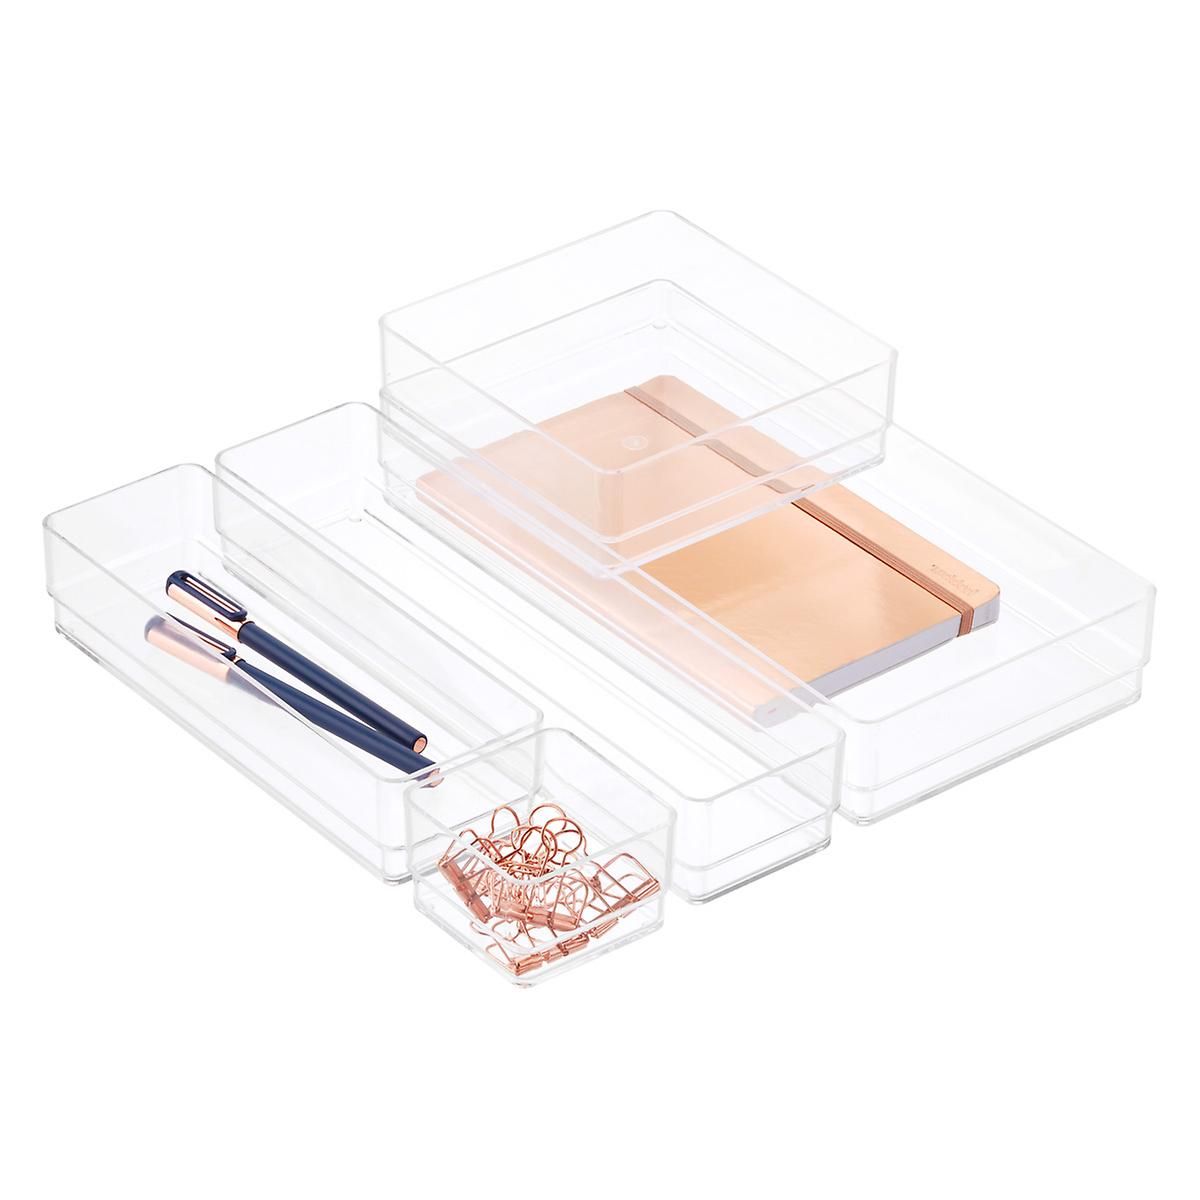 6" x 3" x 2" h Acrylic Drawer Organizer Clear | The Container Store